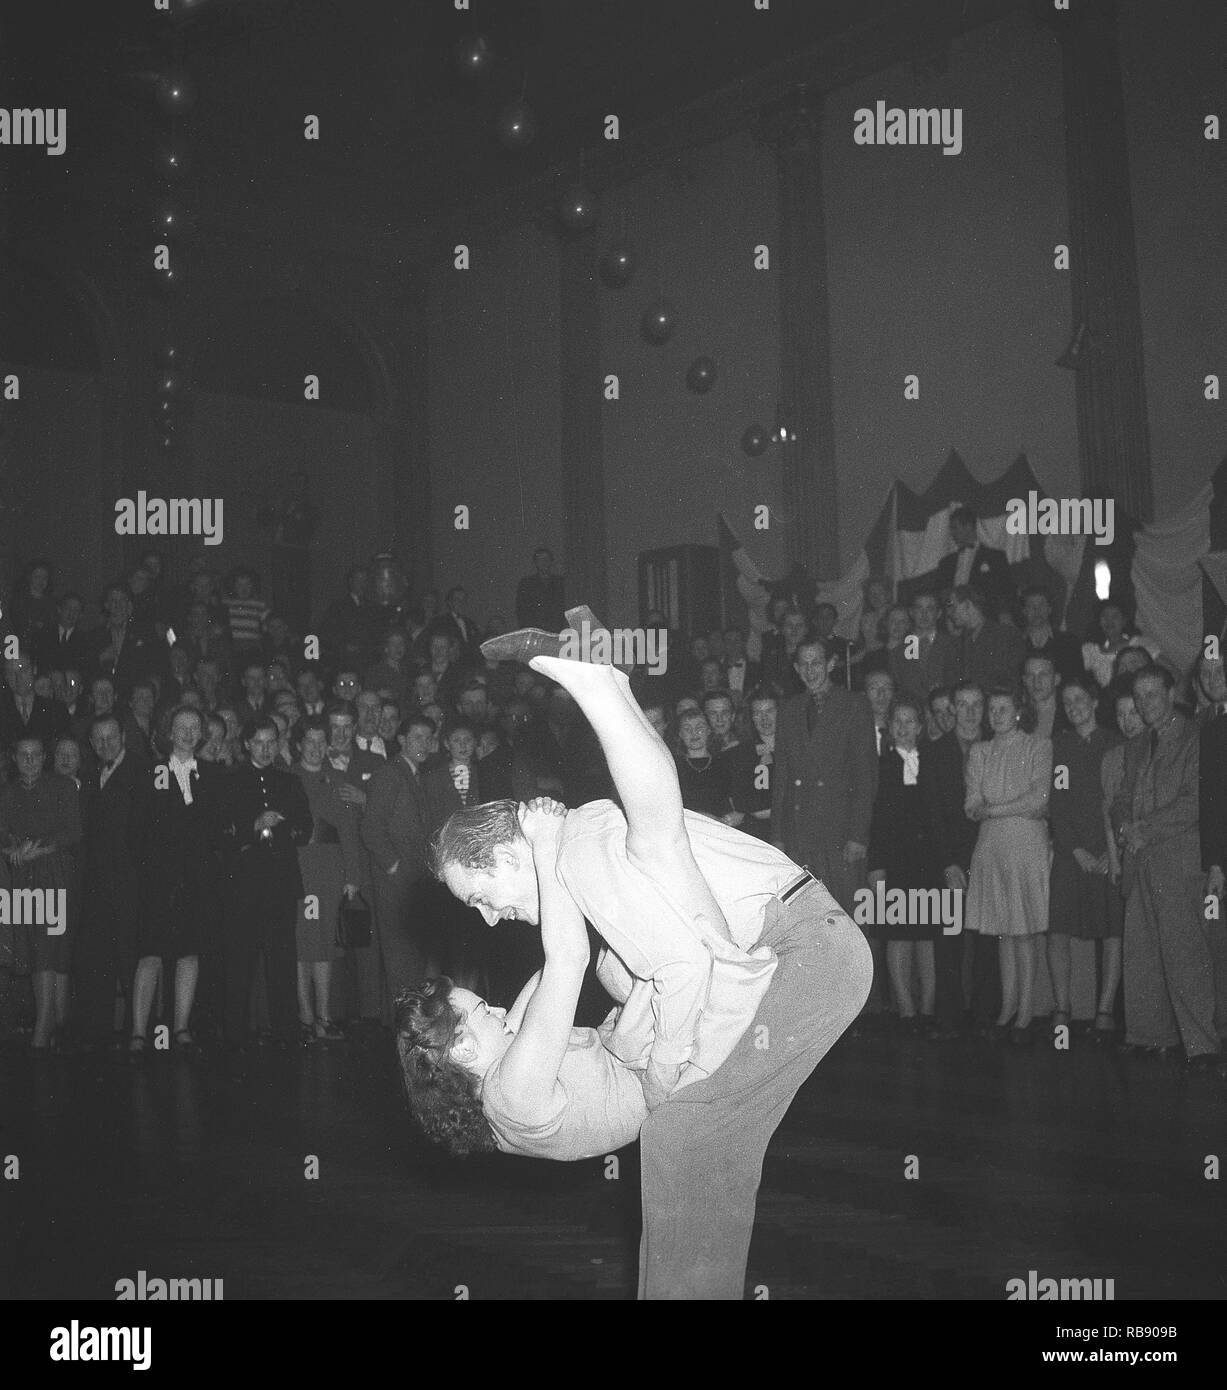 Jitterbug dance. A dance popularized in the United states and spread by American soldiers and sailors around the world during the Second world war. Pictured here a young couple when dancing the Jitterbug dance 1948 during a competition dance event. Photo: Kristoffersson ref AH21-2 Stock Photo